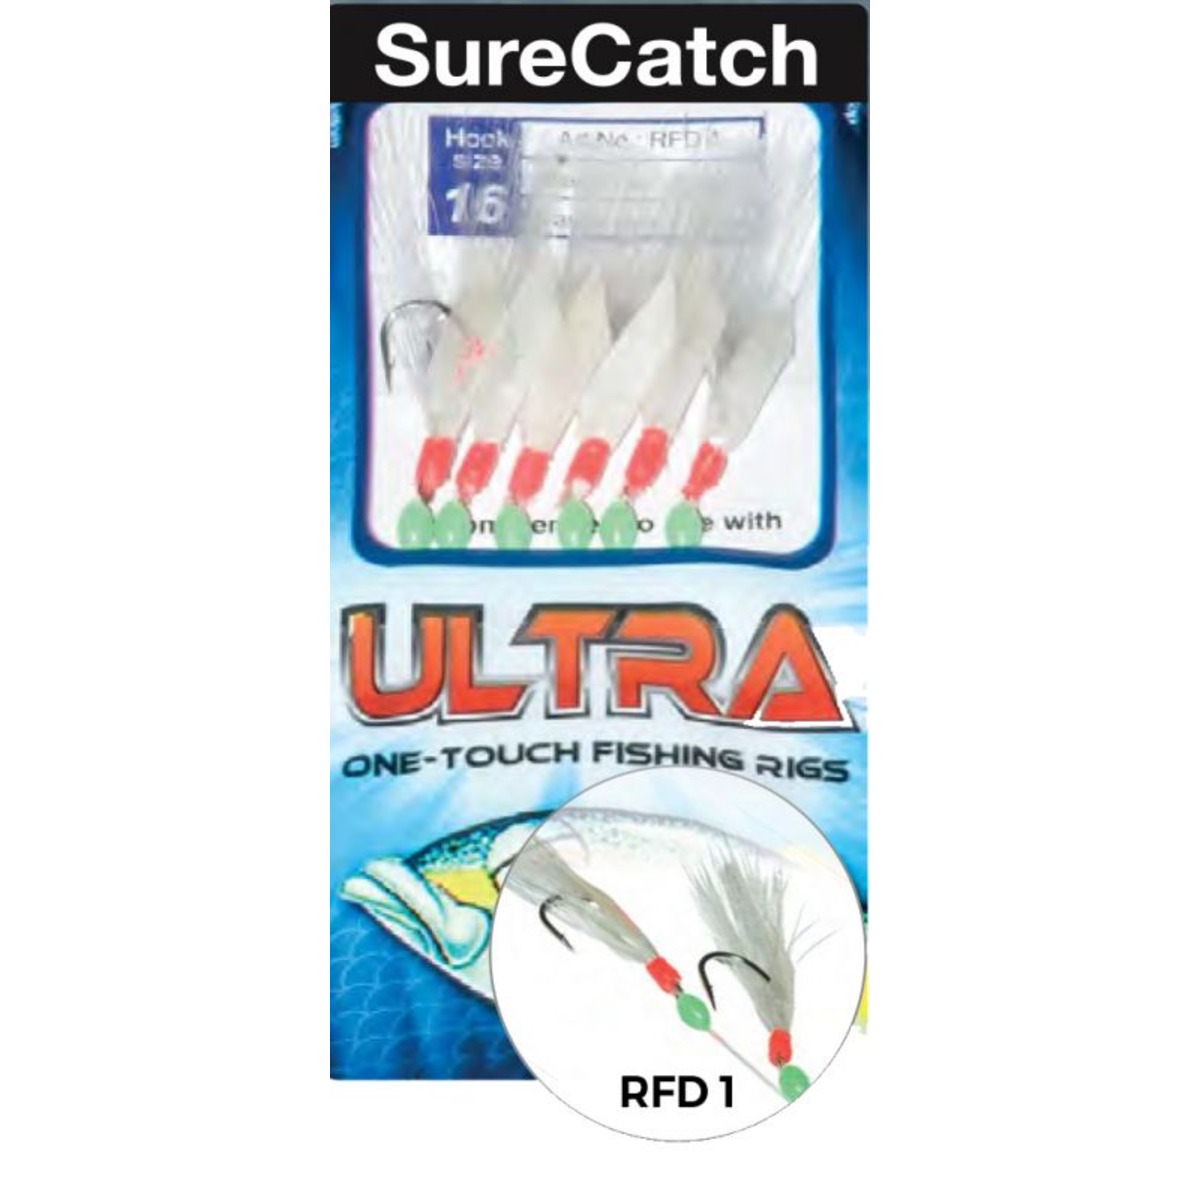 Surecatch Ultra One-touch Fishing Rigs Rfd10 - #10